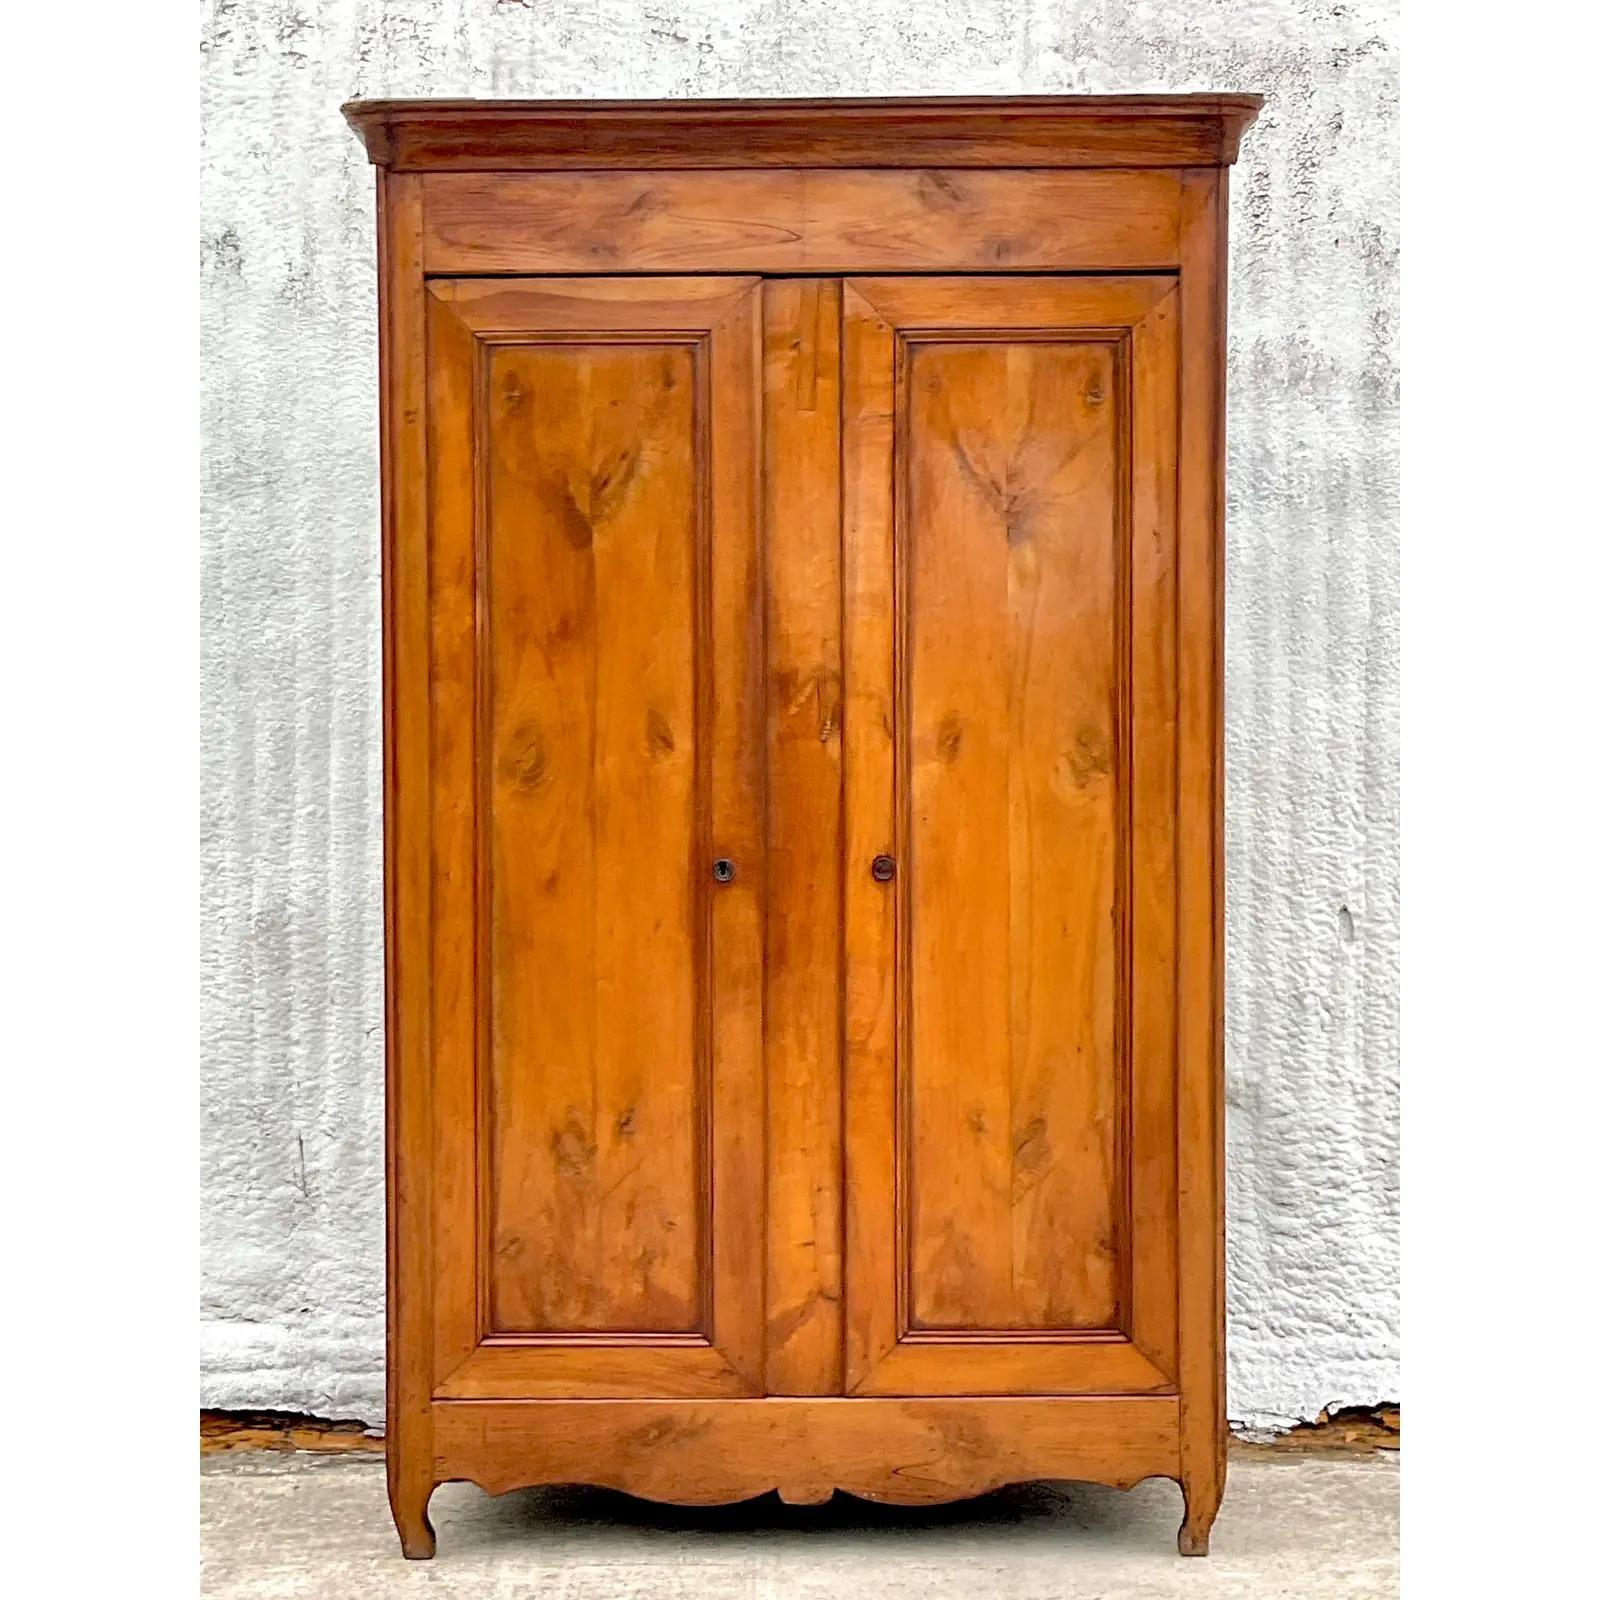 A fantastic vintage Boho Armoire. Incredible wood grain detail on a soaring high frame. Removable boomer for easy movement. Beautiful all over patina from time. Interior private cabinet. Acquired from a Palm Beach estate.